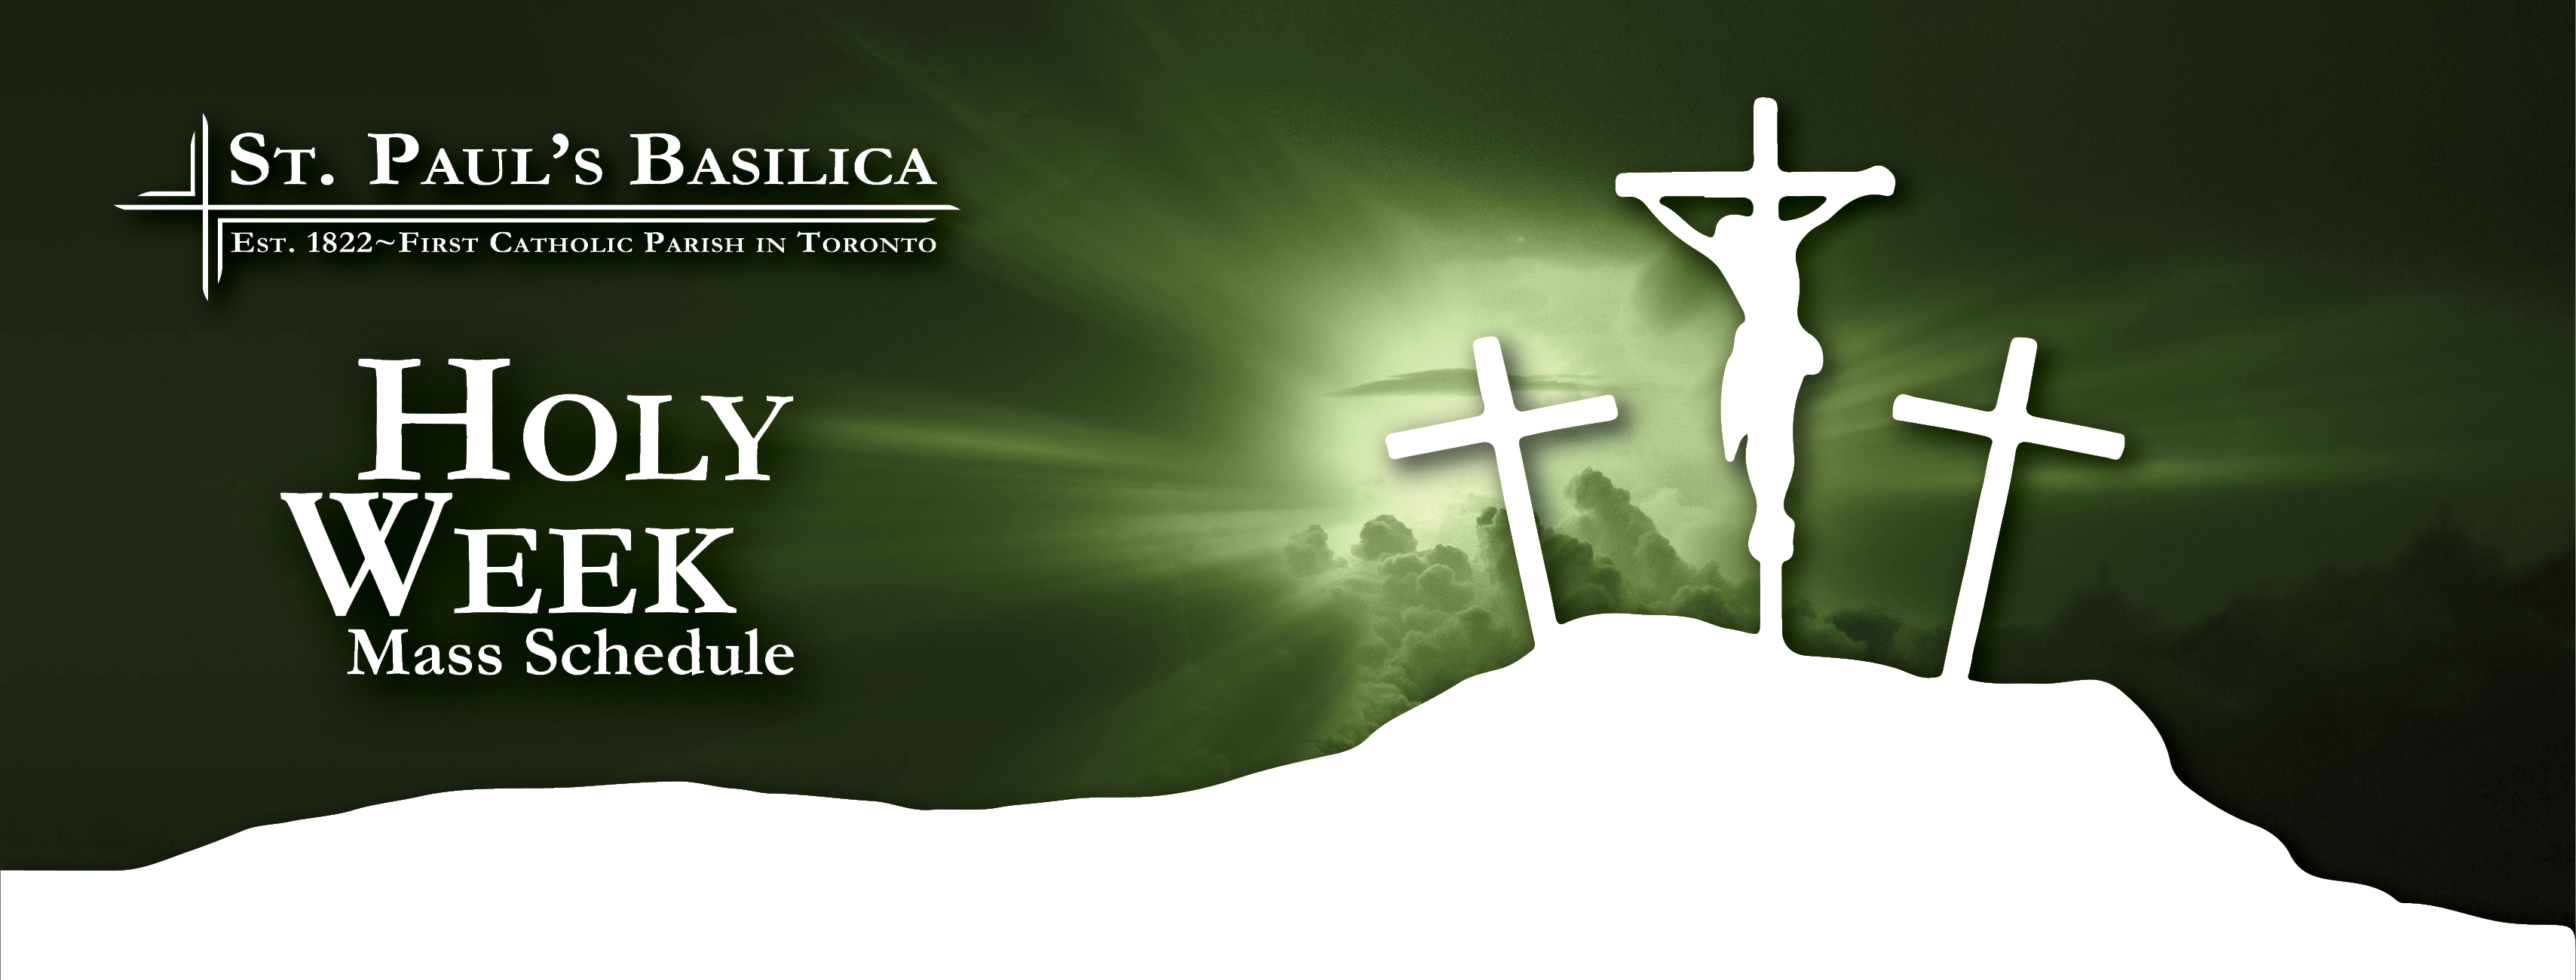 Green sky behind crosses w/ text